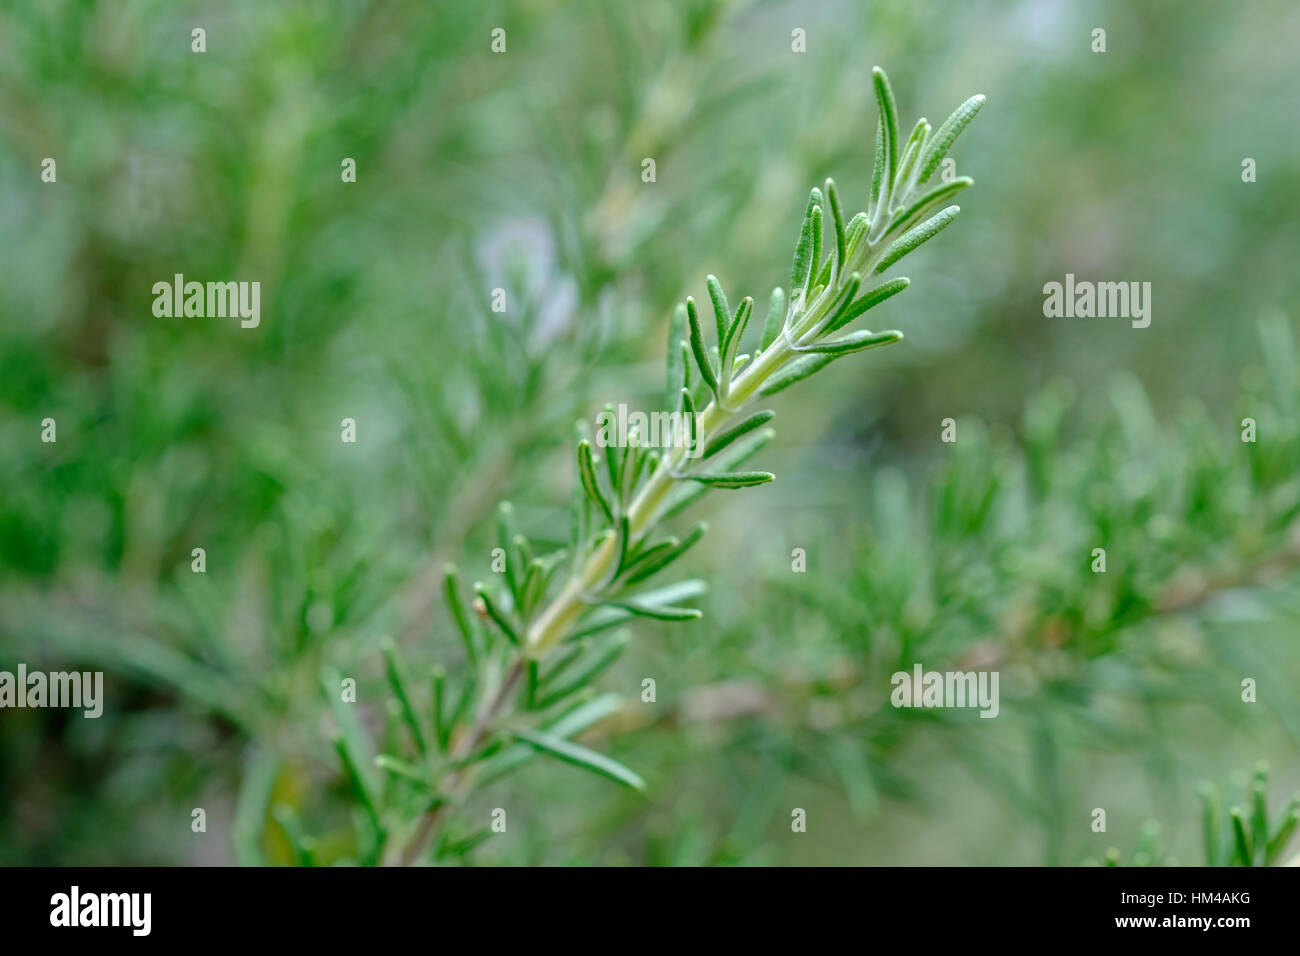 Sprig of rosemary (Rosmarinus officinalis) growing in a kitchen garden Stock Photo